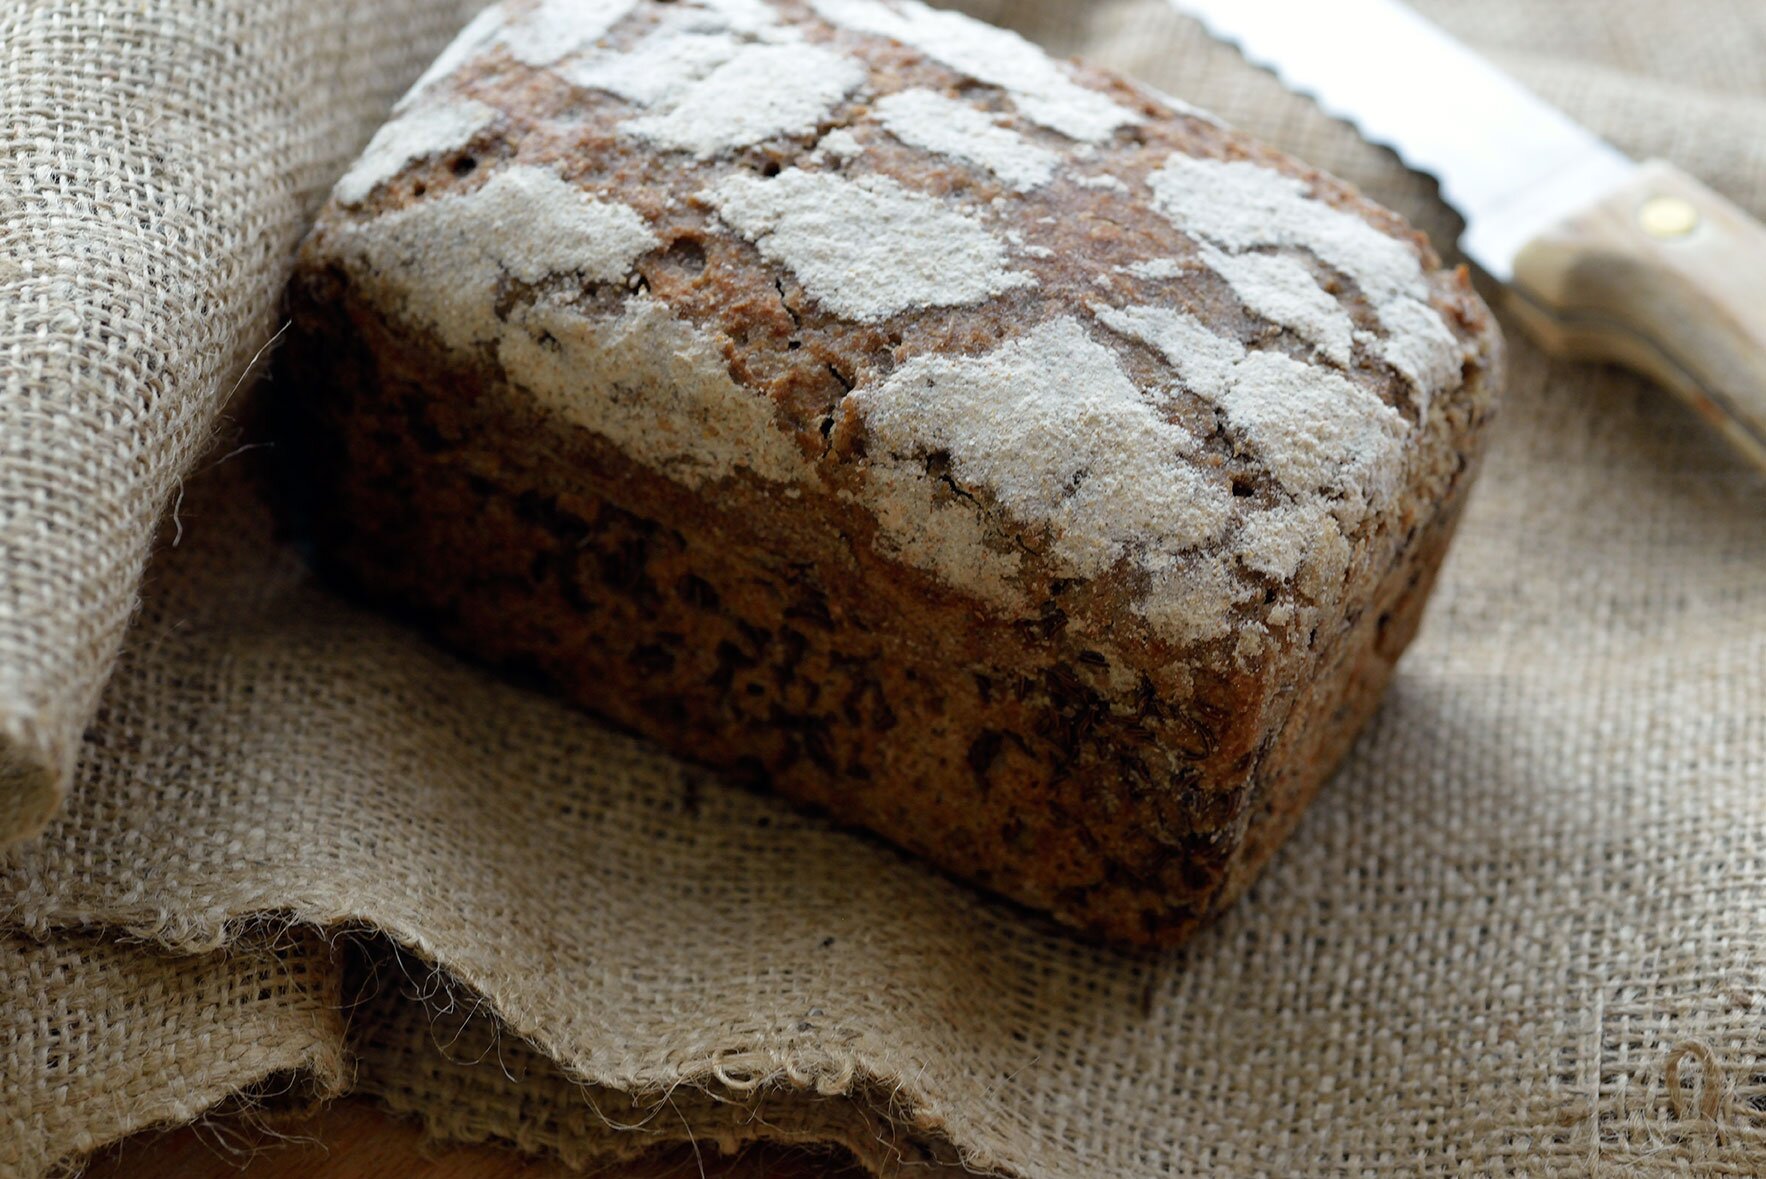 On the rise: the latest bread offerings